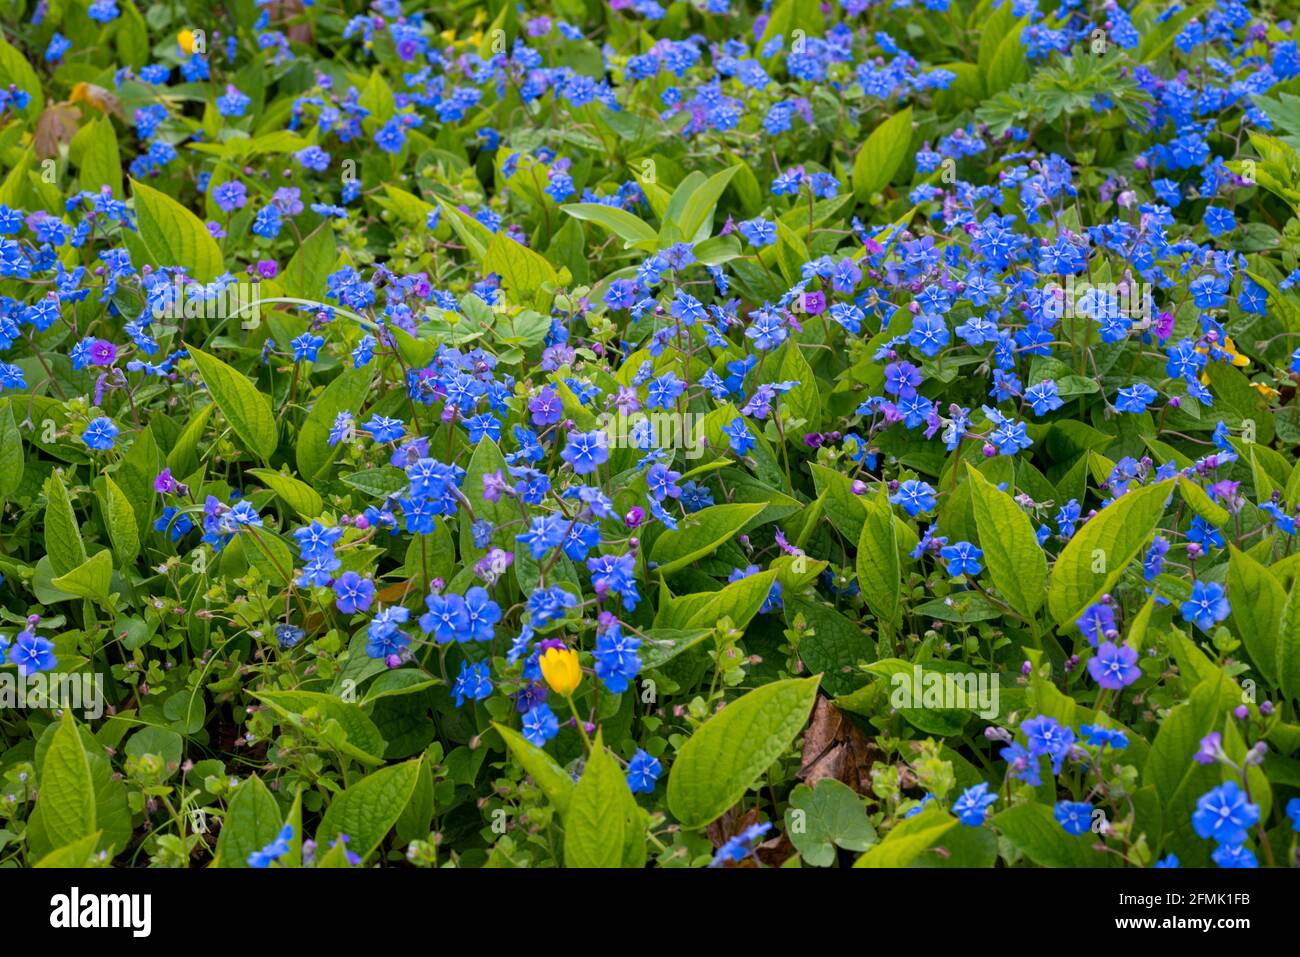 Omphalodes verna. Little blue flowers on a background of green leaves. Stock Photo